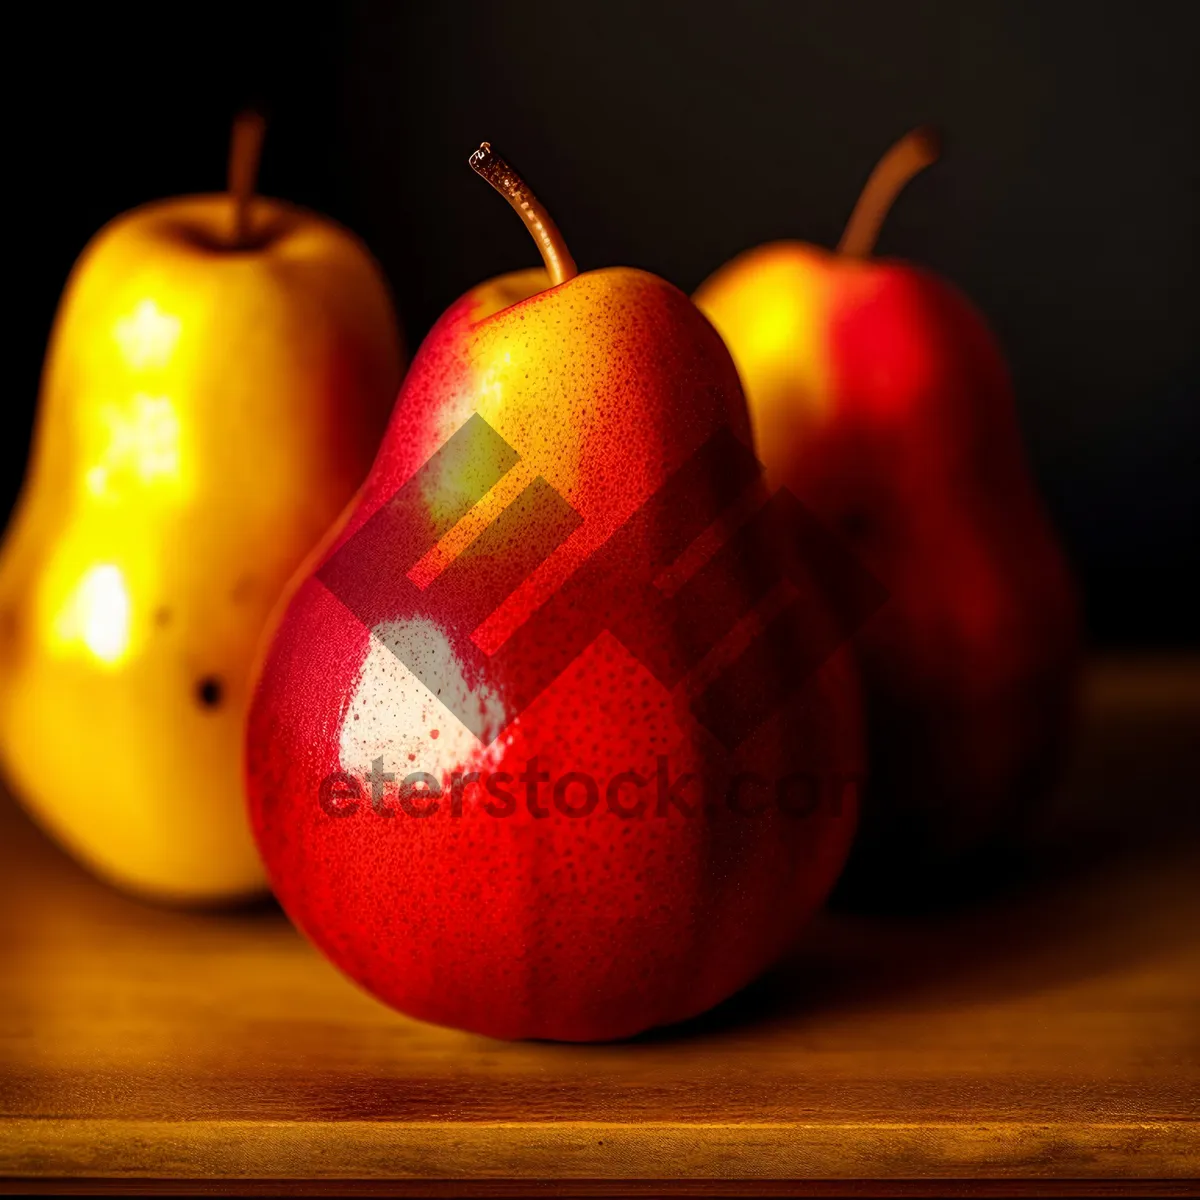 Picture of Juicy Pear - Fresh and Nutritious Edible Fruit